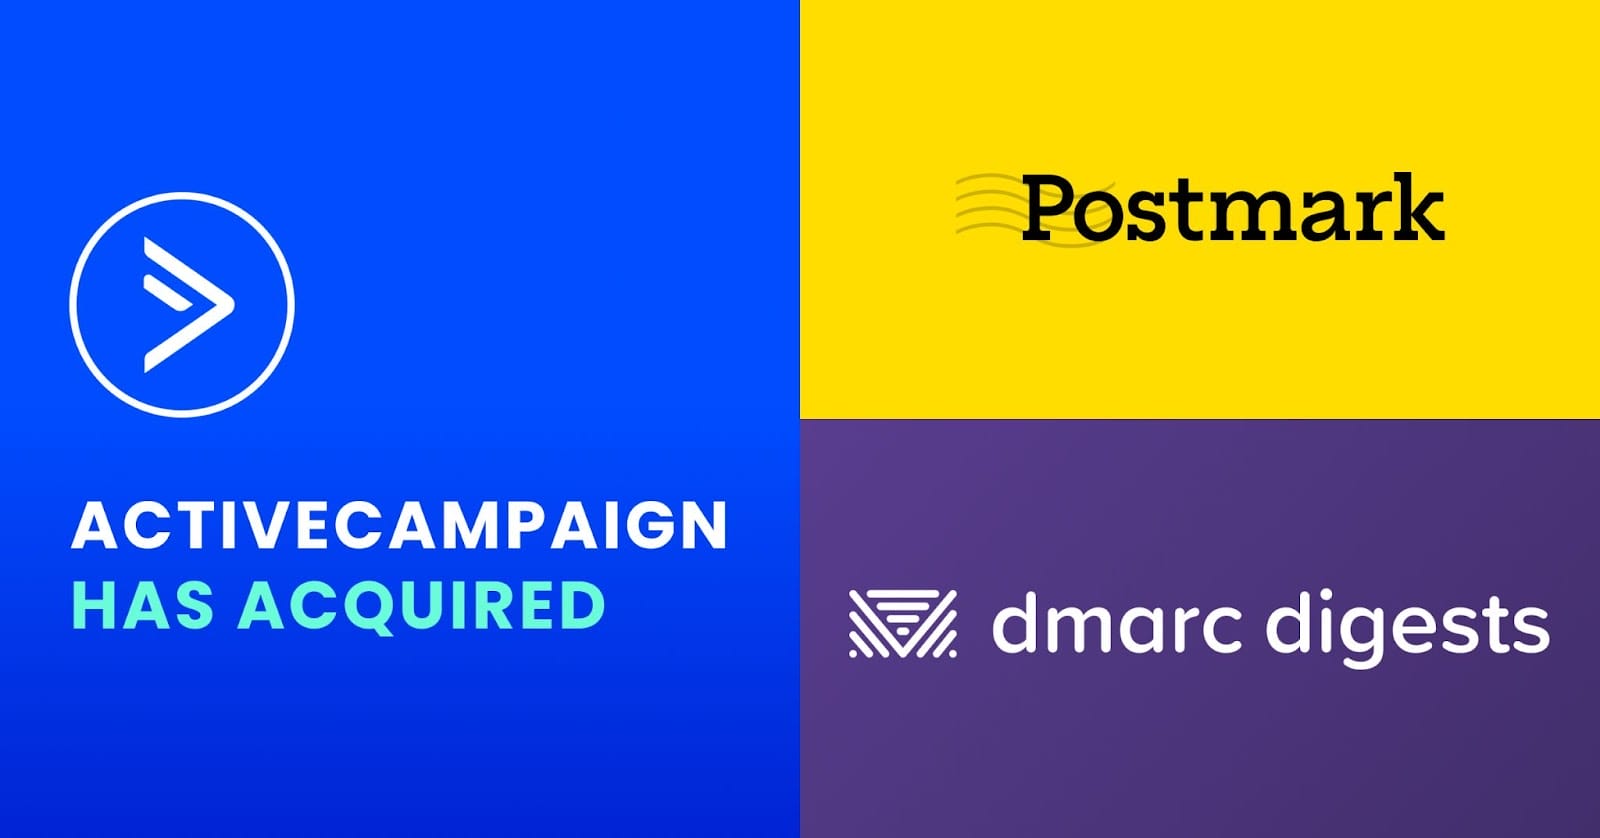 ActiveCampaign Acquires Postmark and dmarc digests